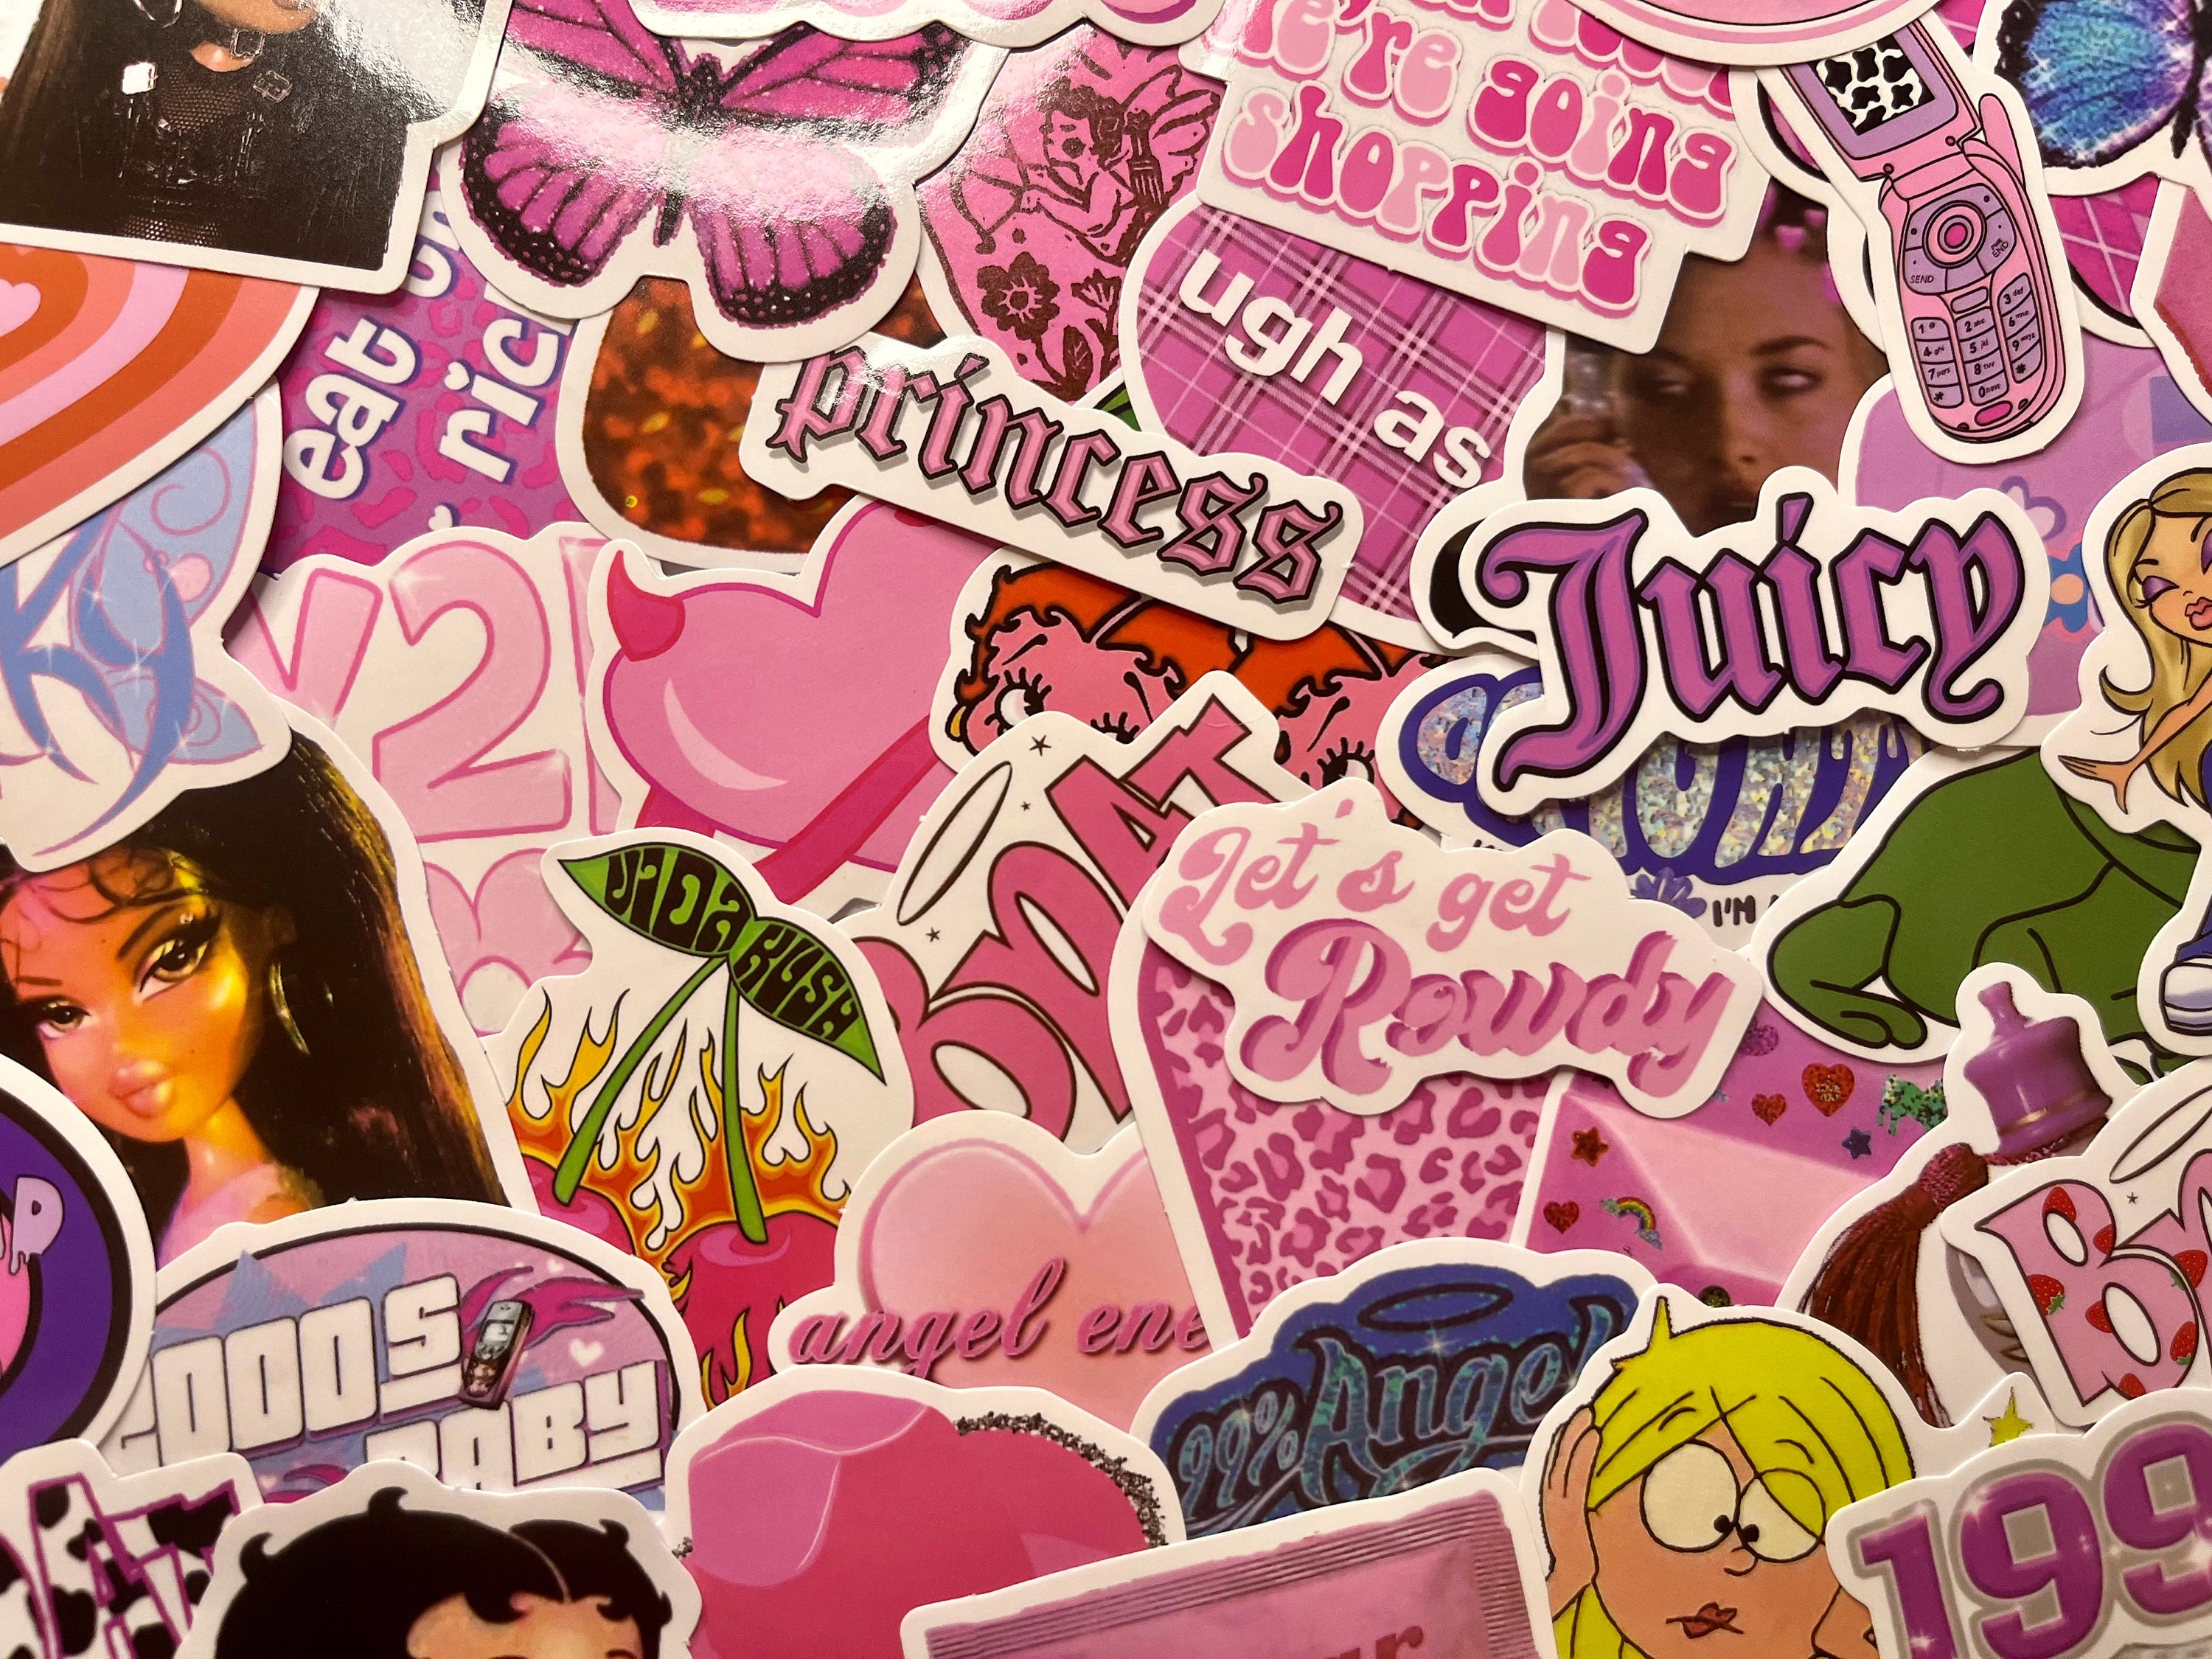 K1tpde 52PCS Y2k Aesthetic Stickers, Cyber 2000s Fashion Sticker for Girls  Pink Heart 